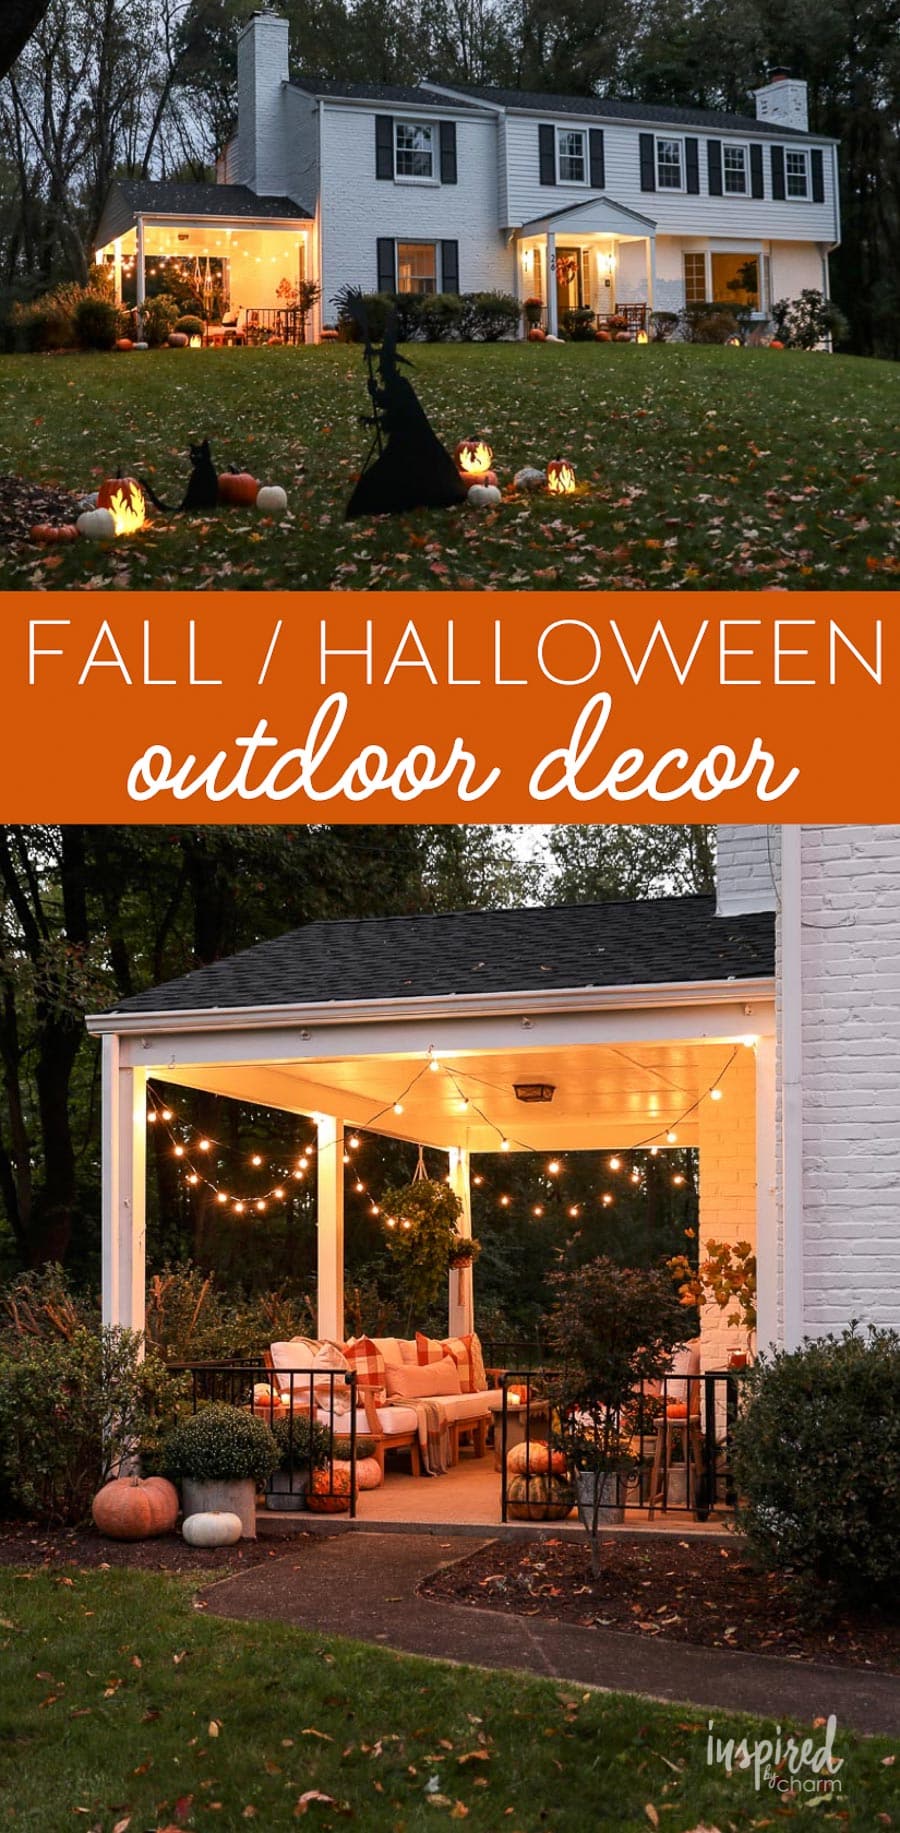 Outdoor Halloween Decorations and My Porch at Night #halloween #fall #decor #decorations #outdoor #porch